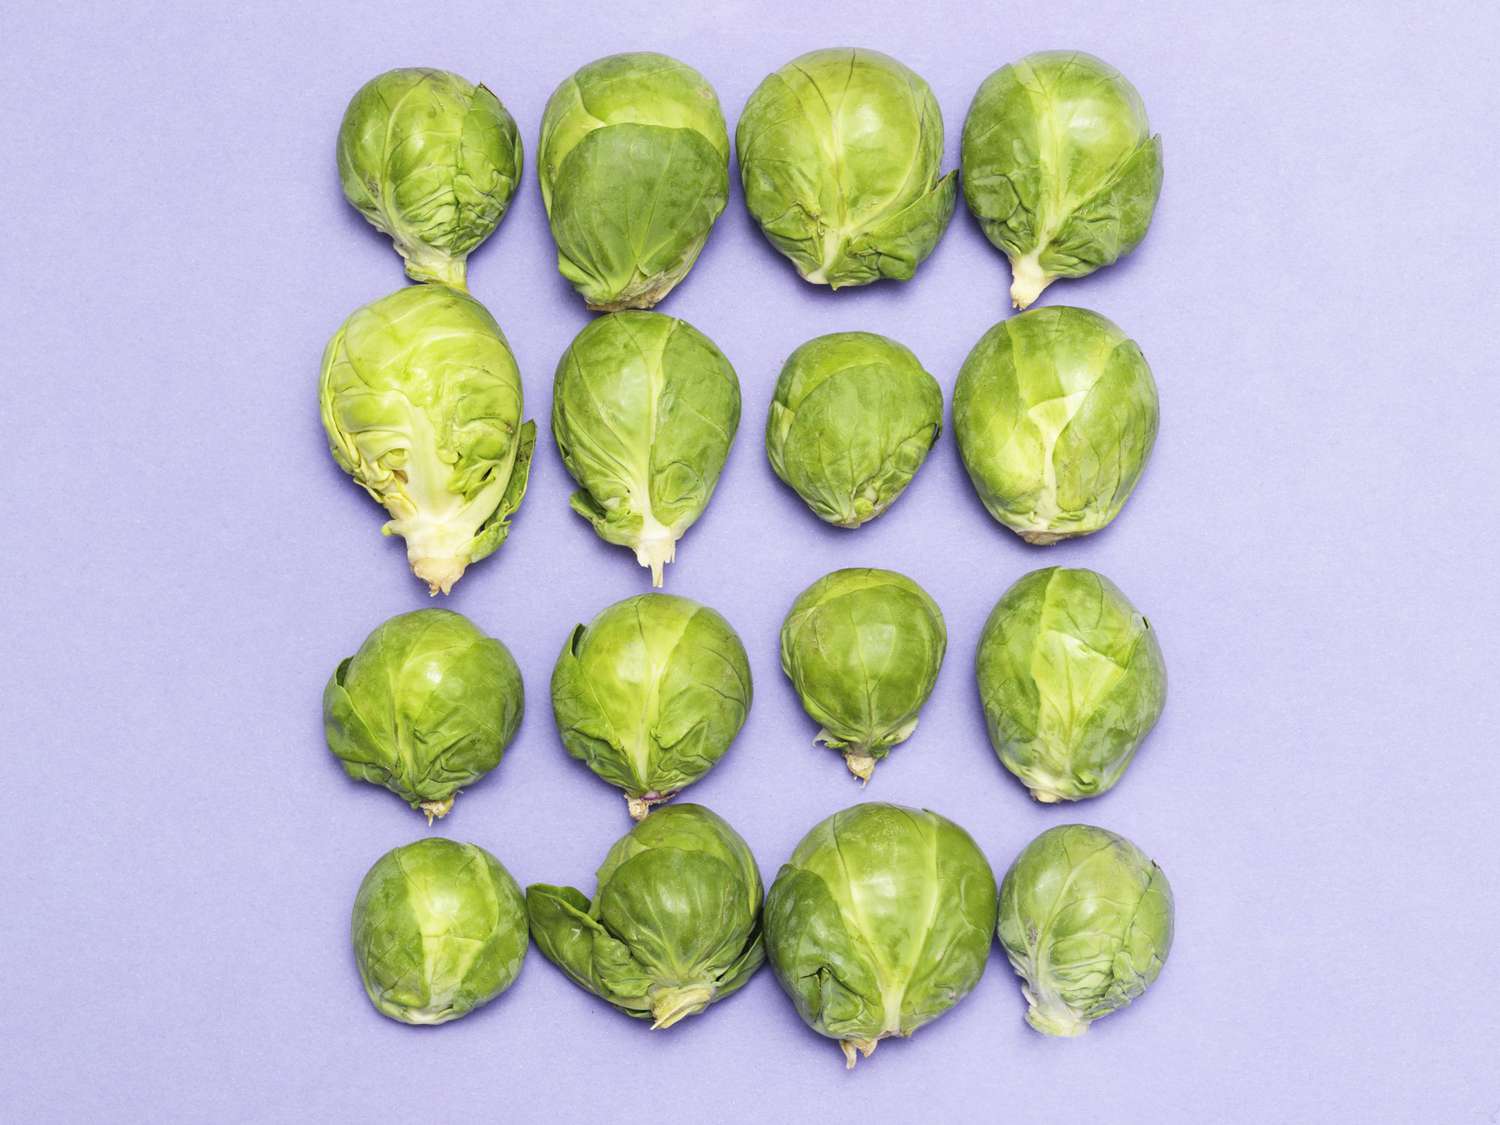 Brussels sprouts: foods high in folate